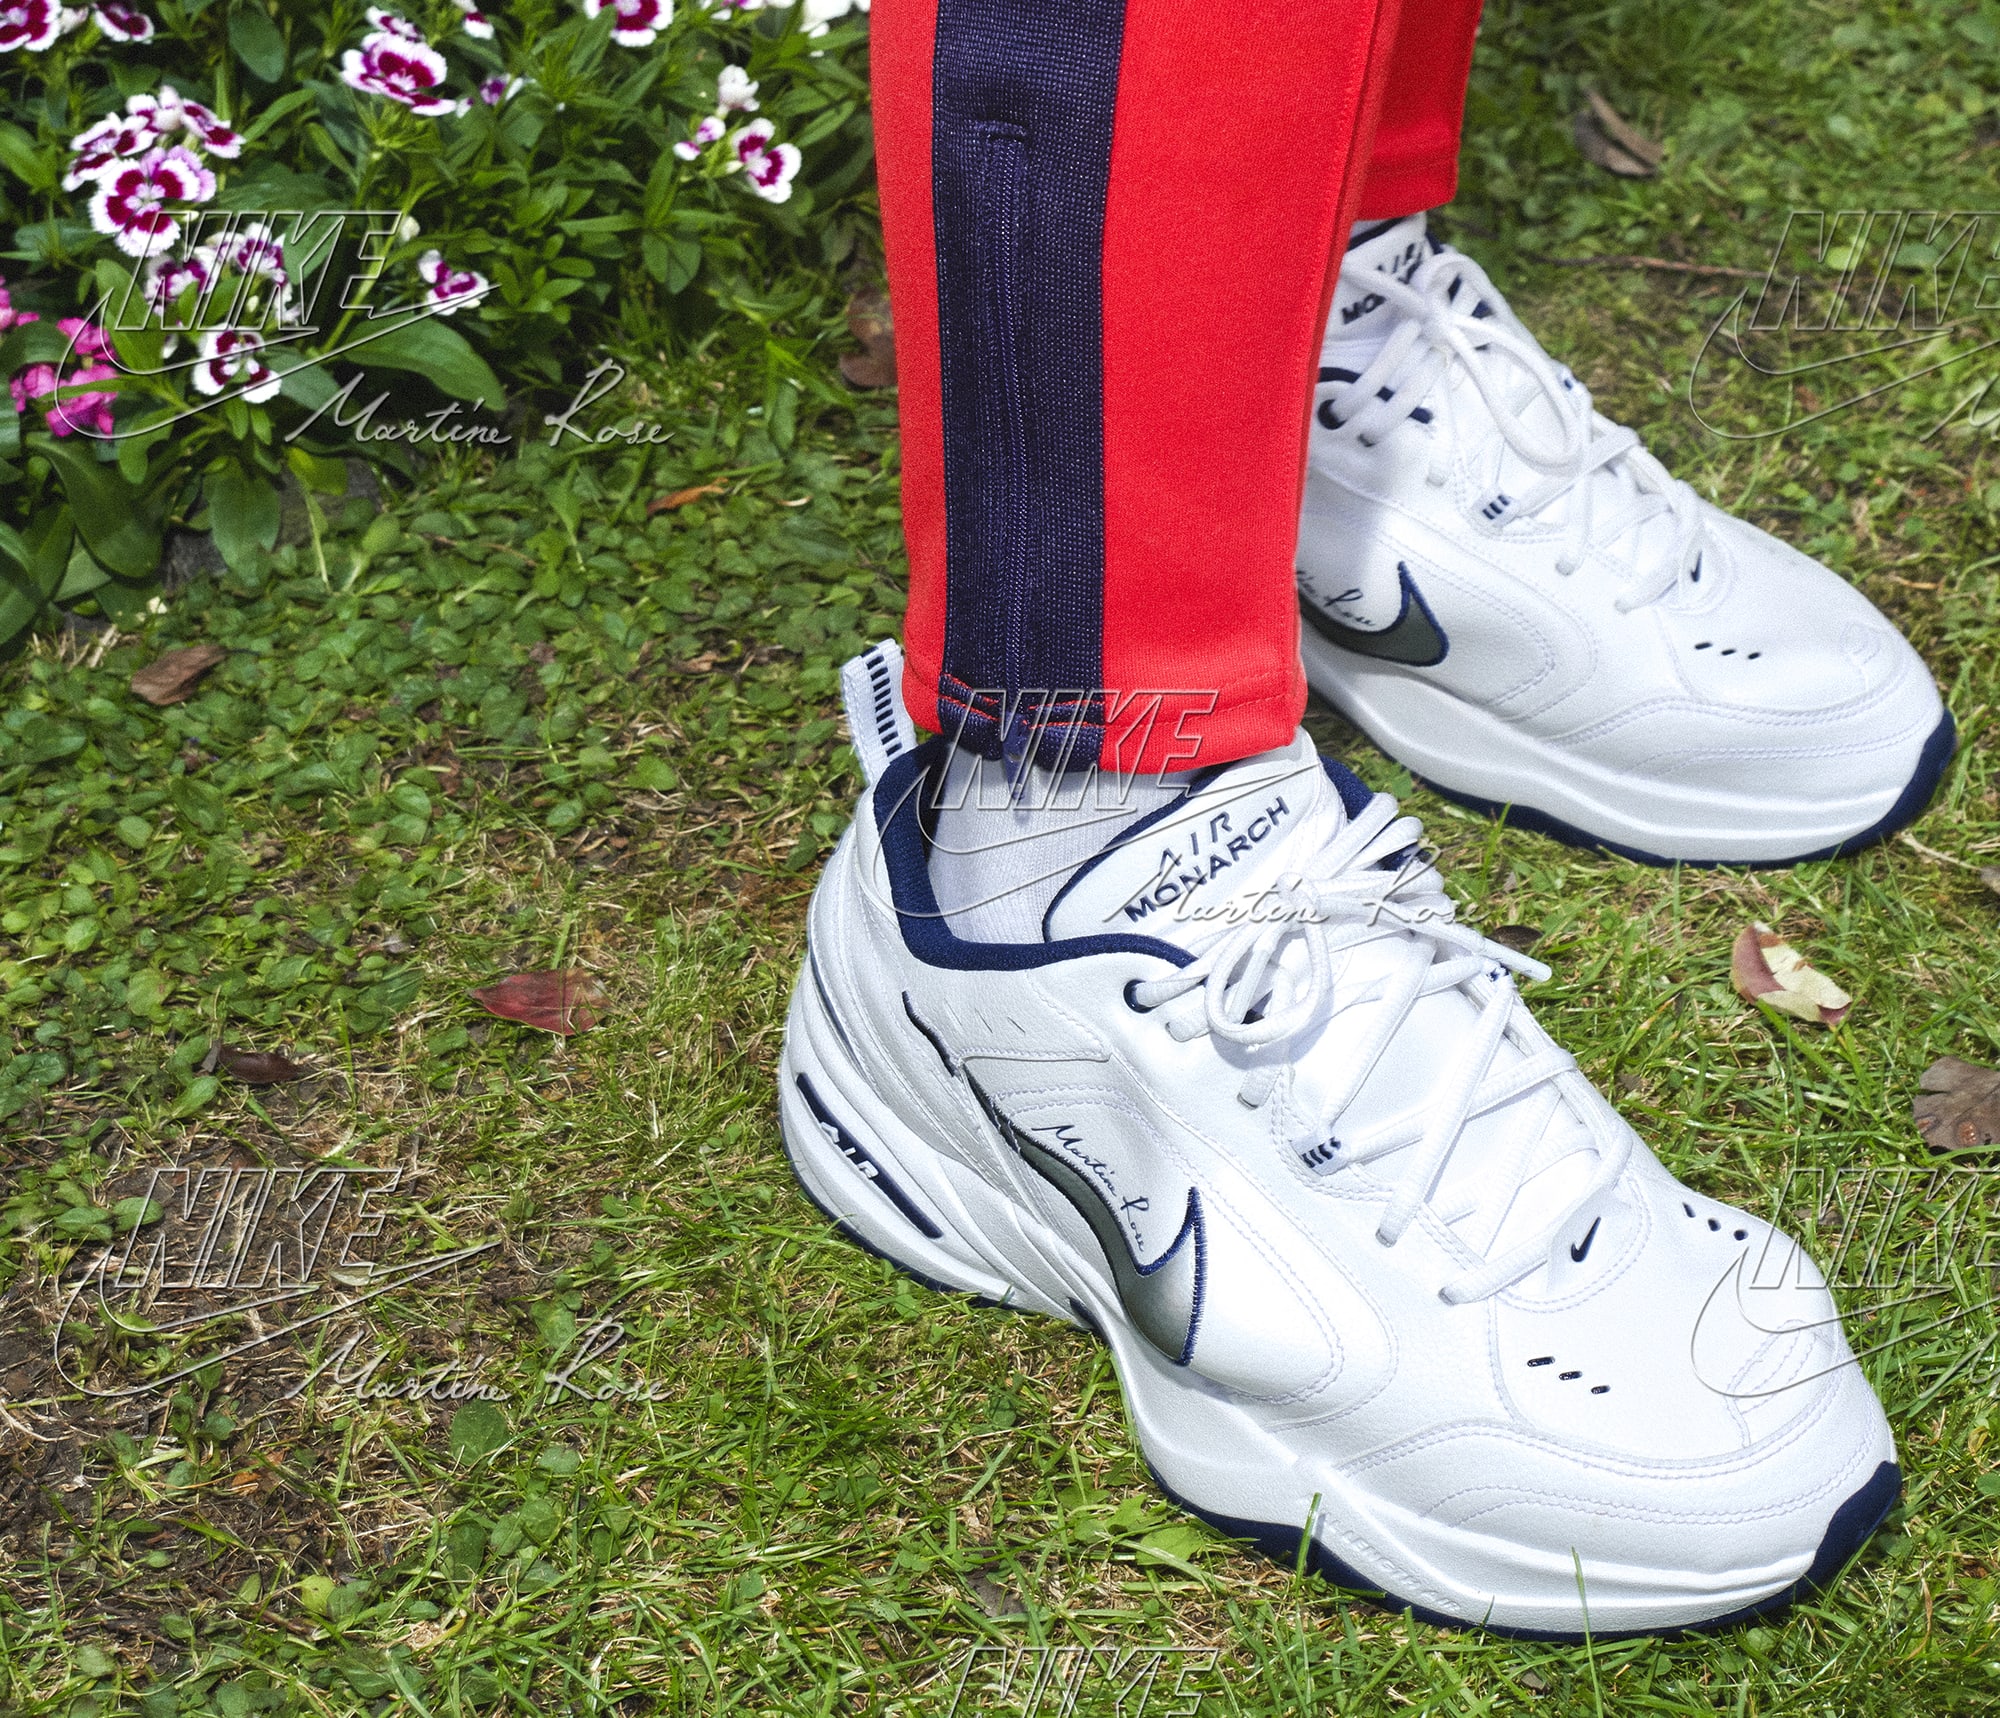 Martine Rose Reimagined the Nike Air Monarch